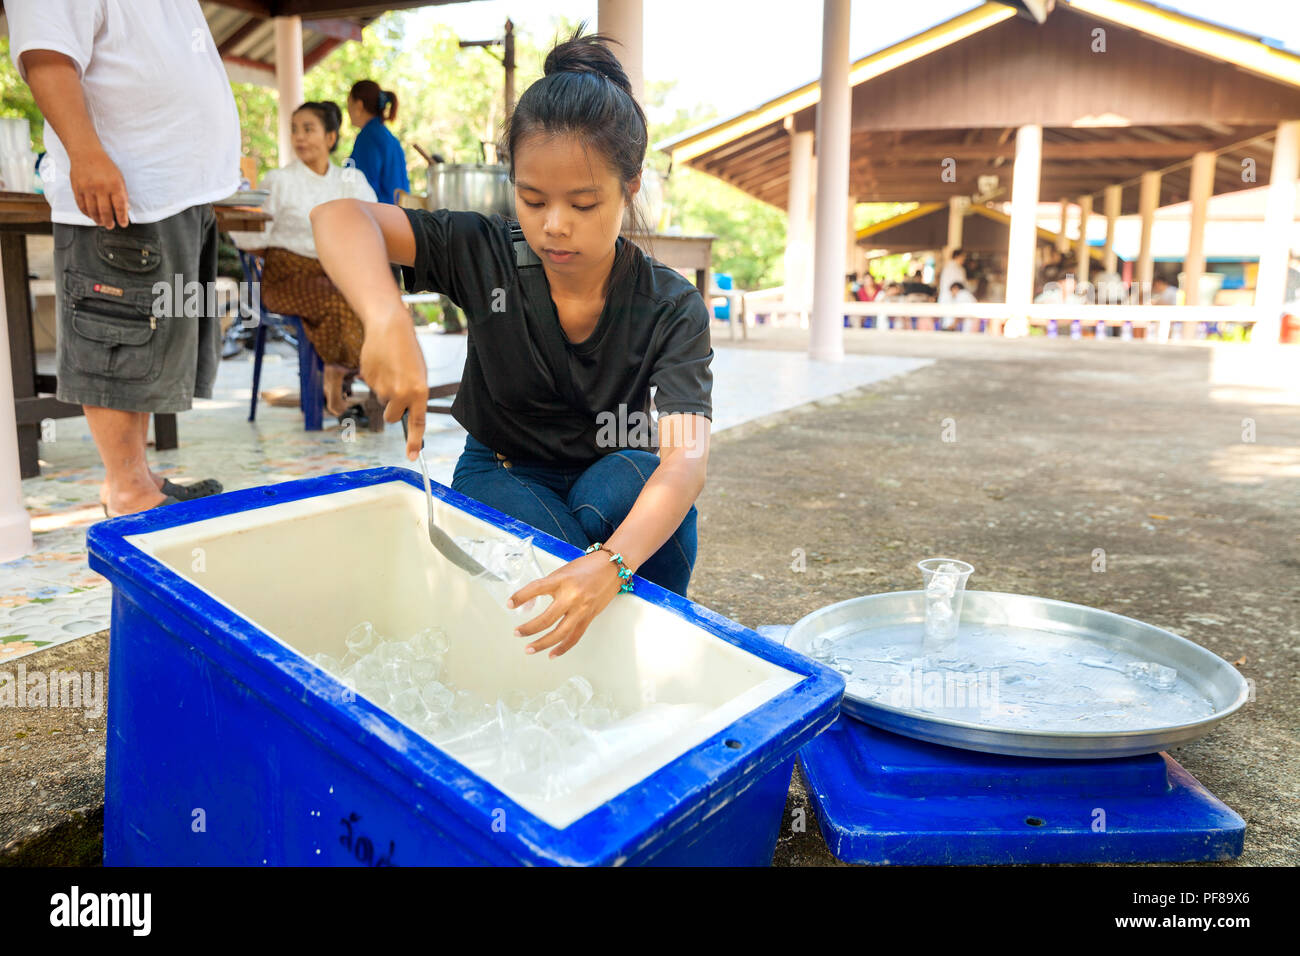 Thailand woman gathered in a Buddhist temple for a charity dinner and helping people Stock Photo